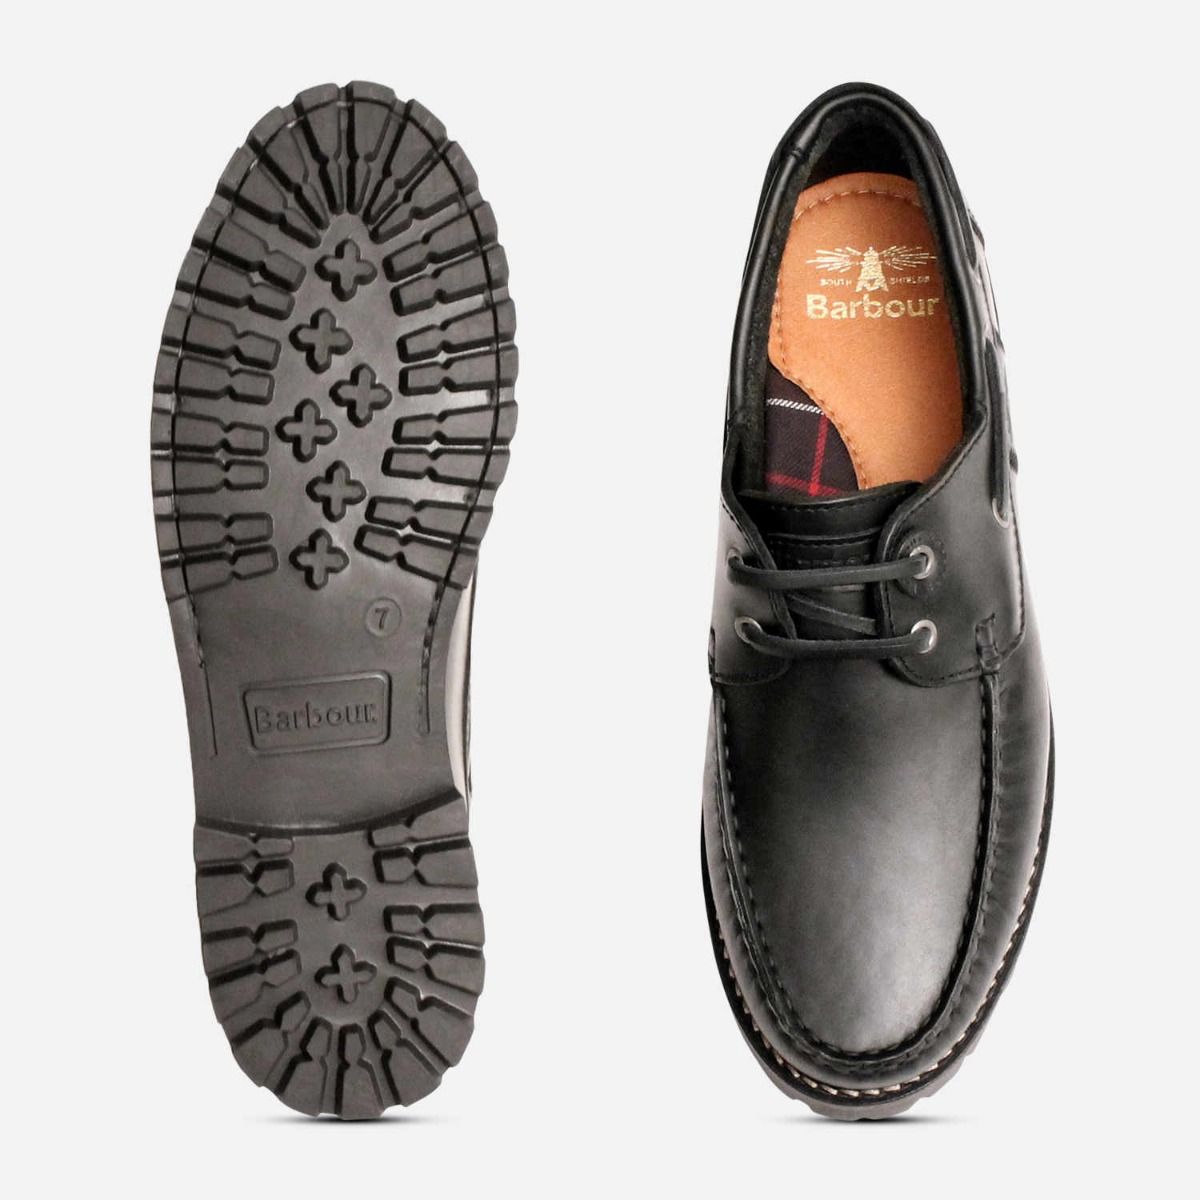 Barbour Black Leather Stern Boat Shoes 